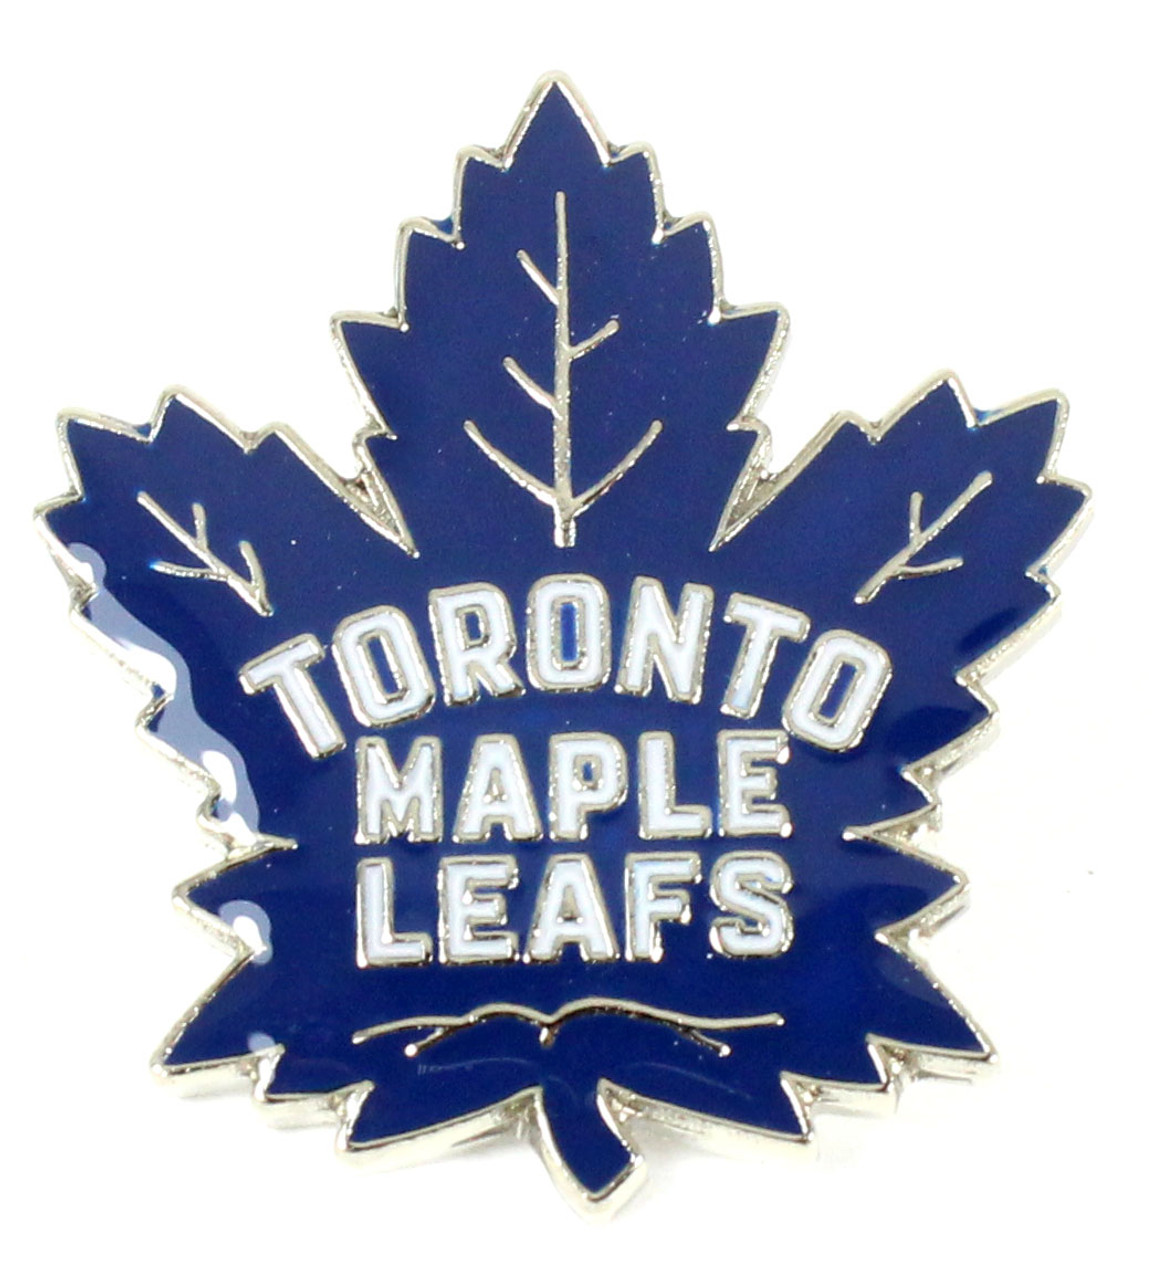 Pin on Maple leafs